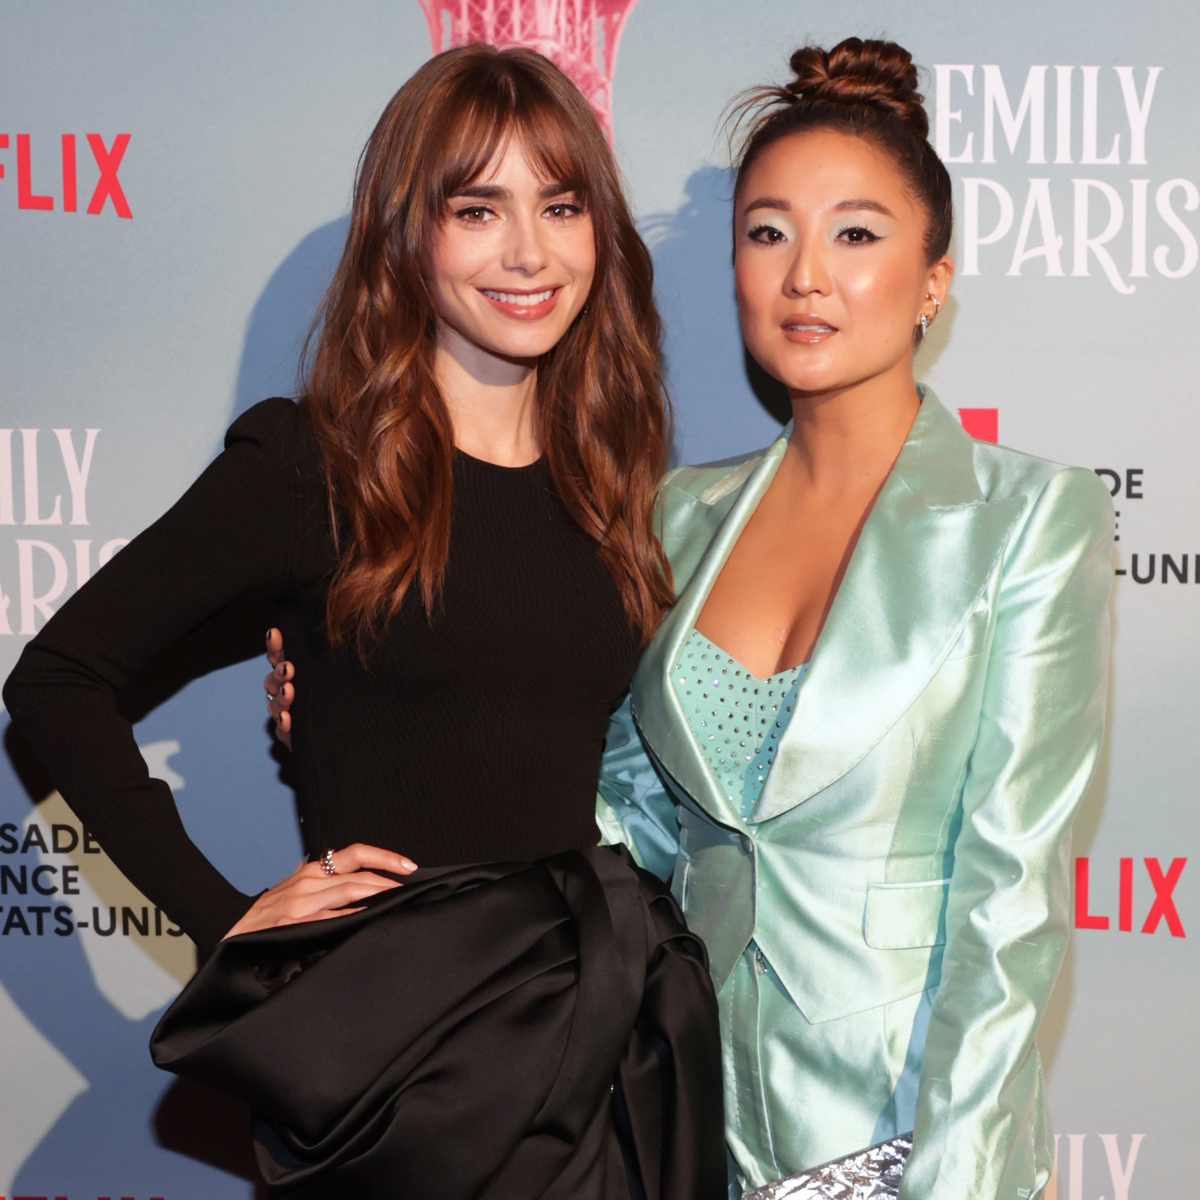 EXCLUSIVE: Lily Collins & Ashley Park on challenges of dressing up for Emily in Paris Season 2 after lockdown